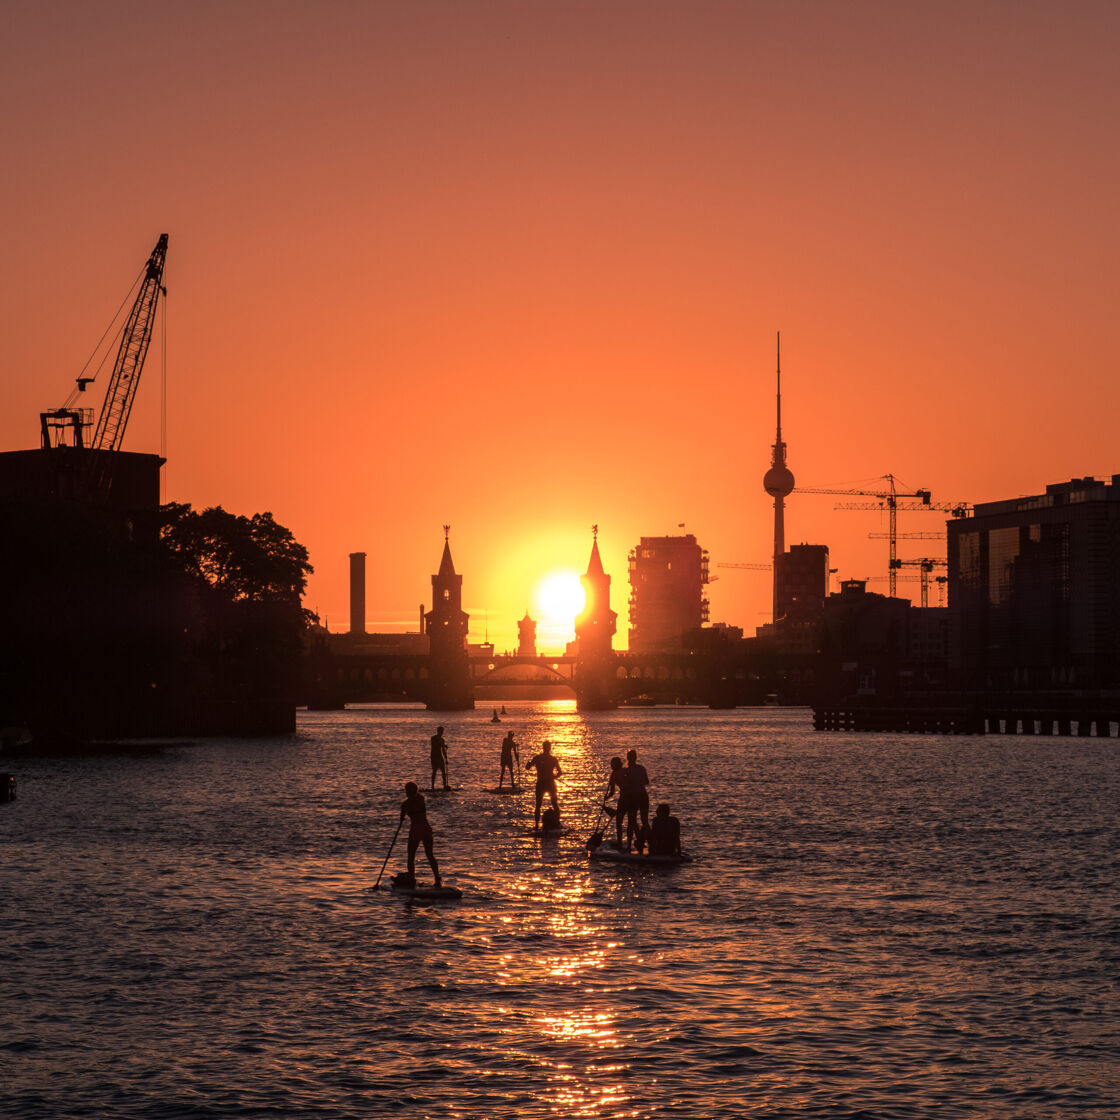 Paddle-boarders paddle towards sunset on the river Spree in Berlin with a bridge resembling a castle, towering cranes, and the famous Berlin TV tower in the background.